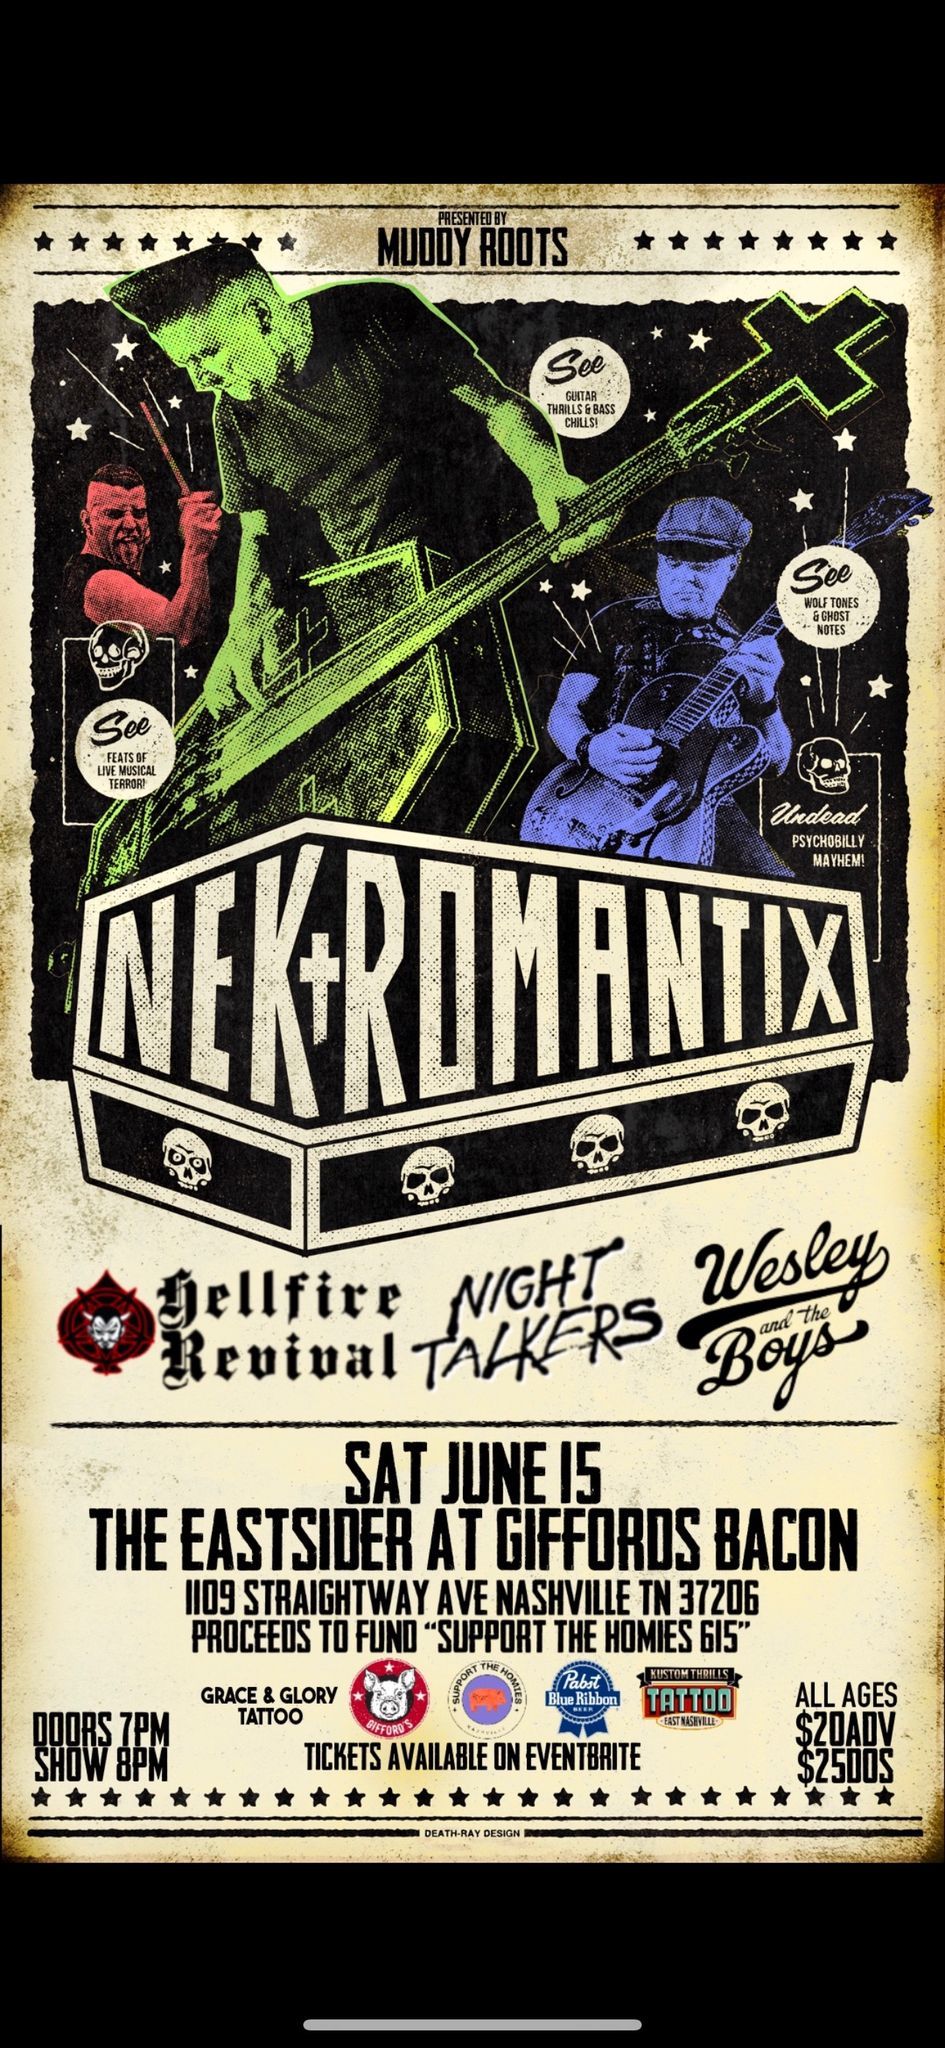 MUDDY ROOTS PRESENTS: Nekromantix at Giffords Bacon(now The Eastsider) 